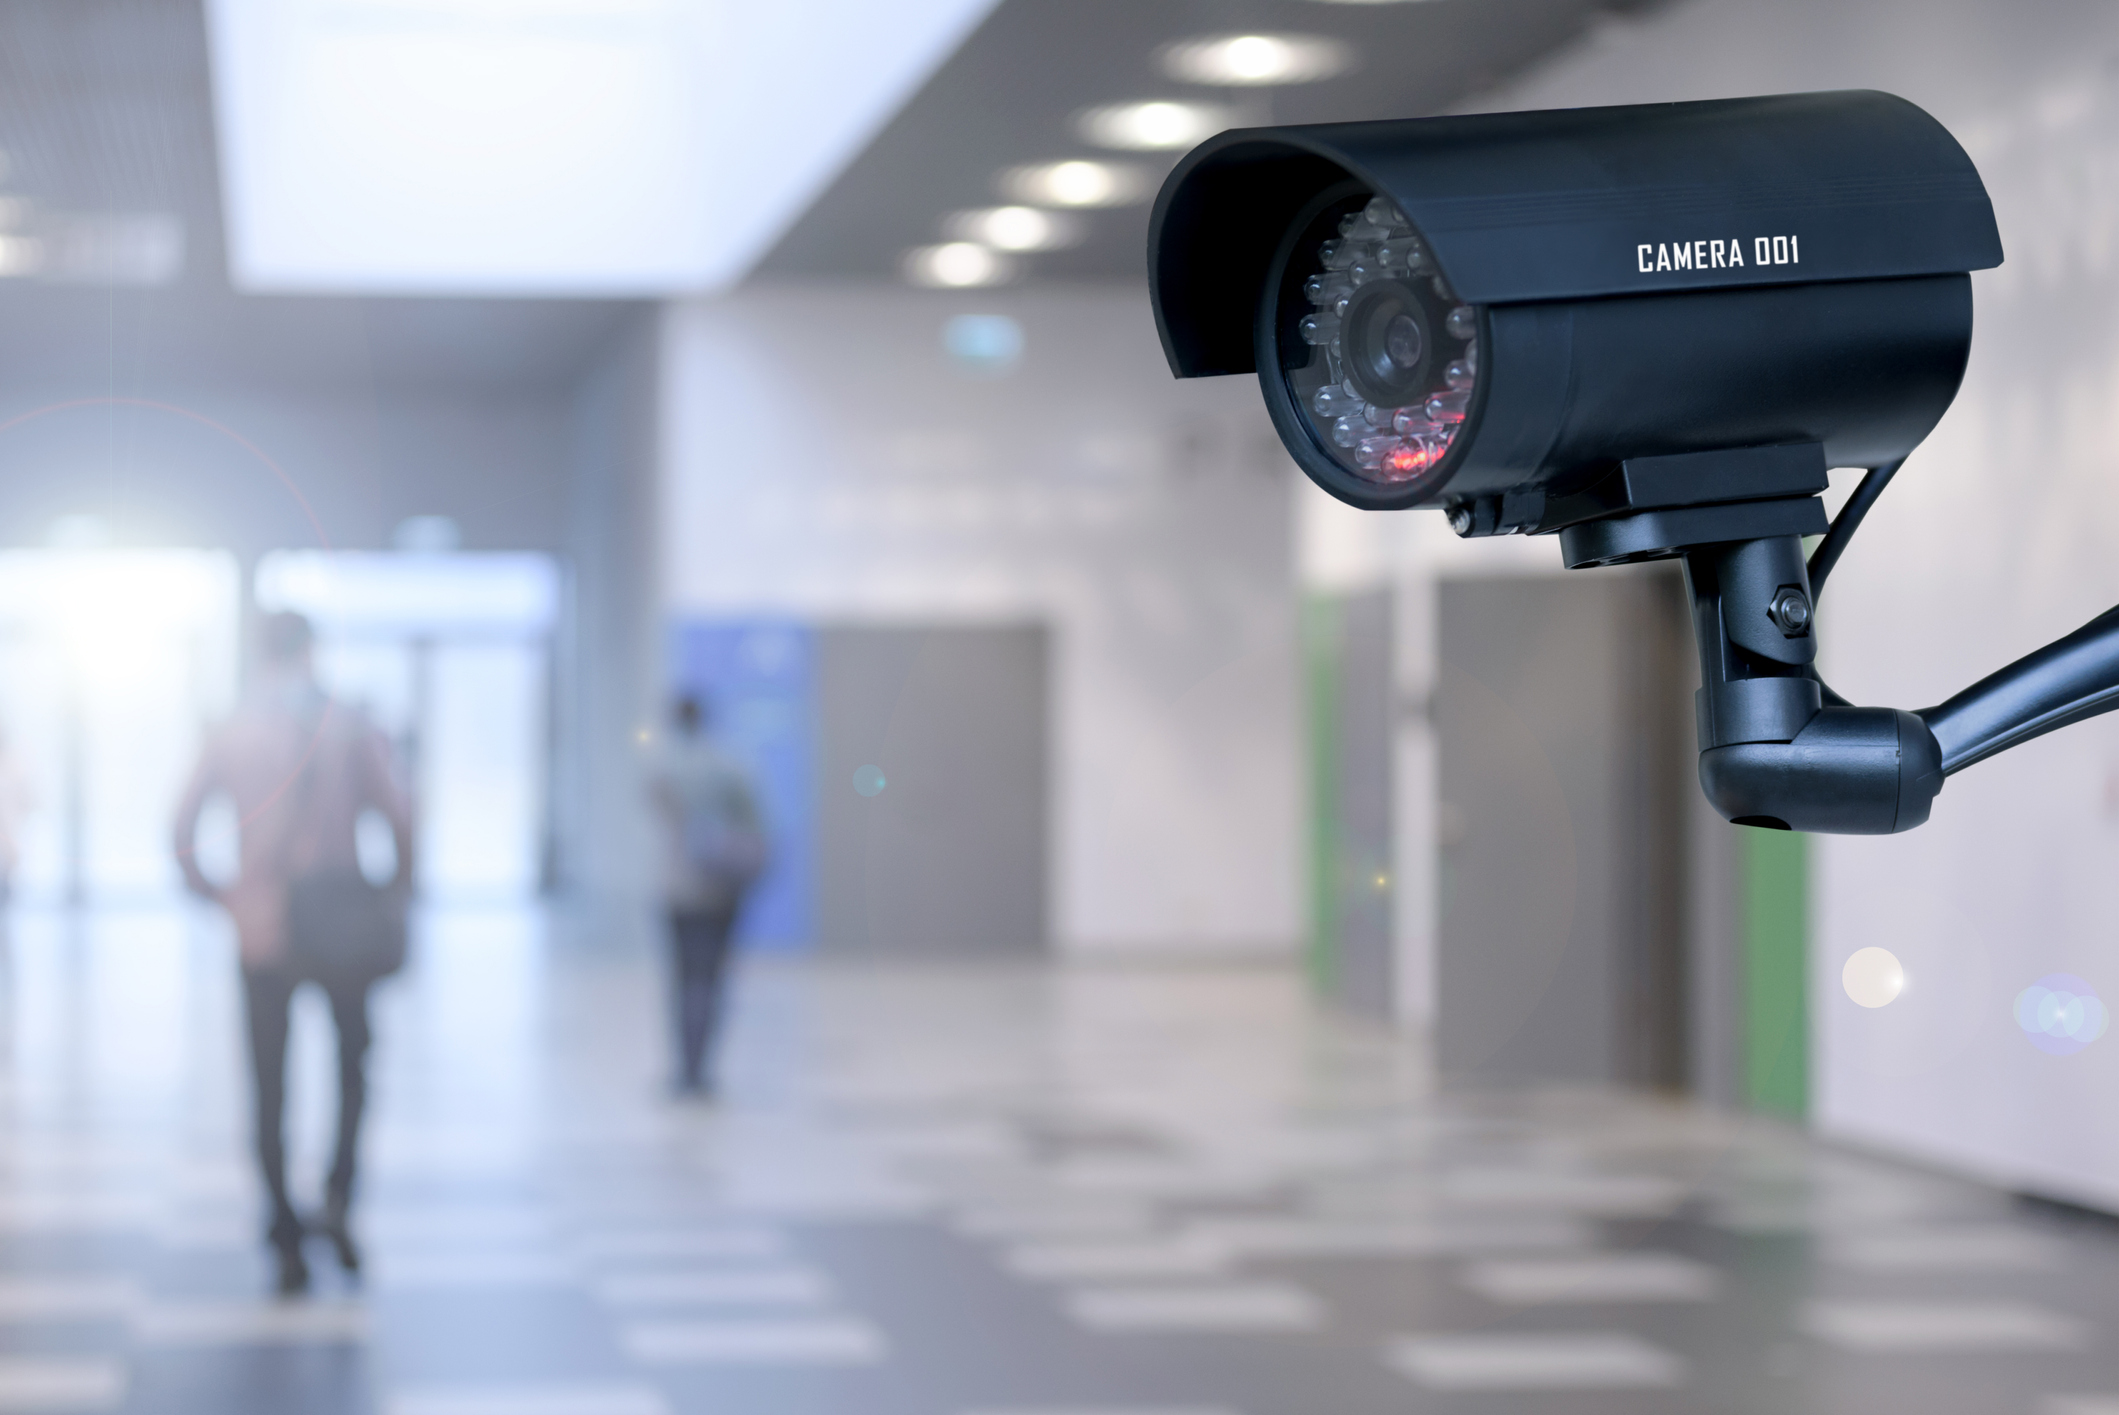 What Are the Best Security Cameras for Small Business? - business.com